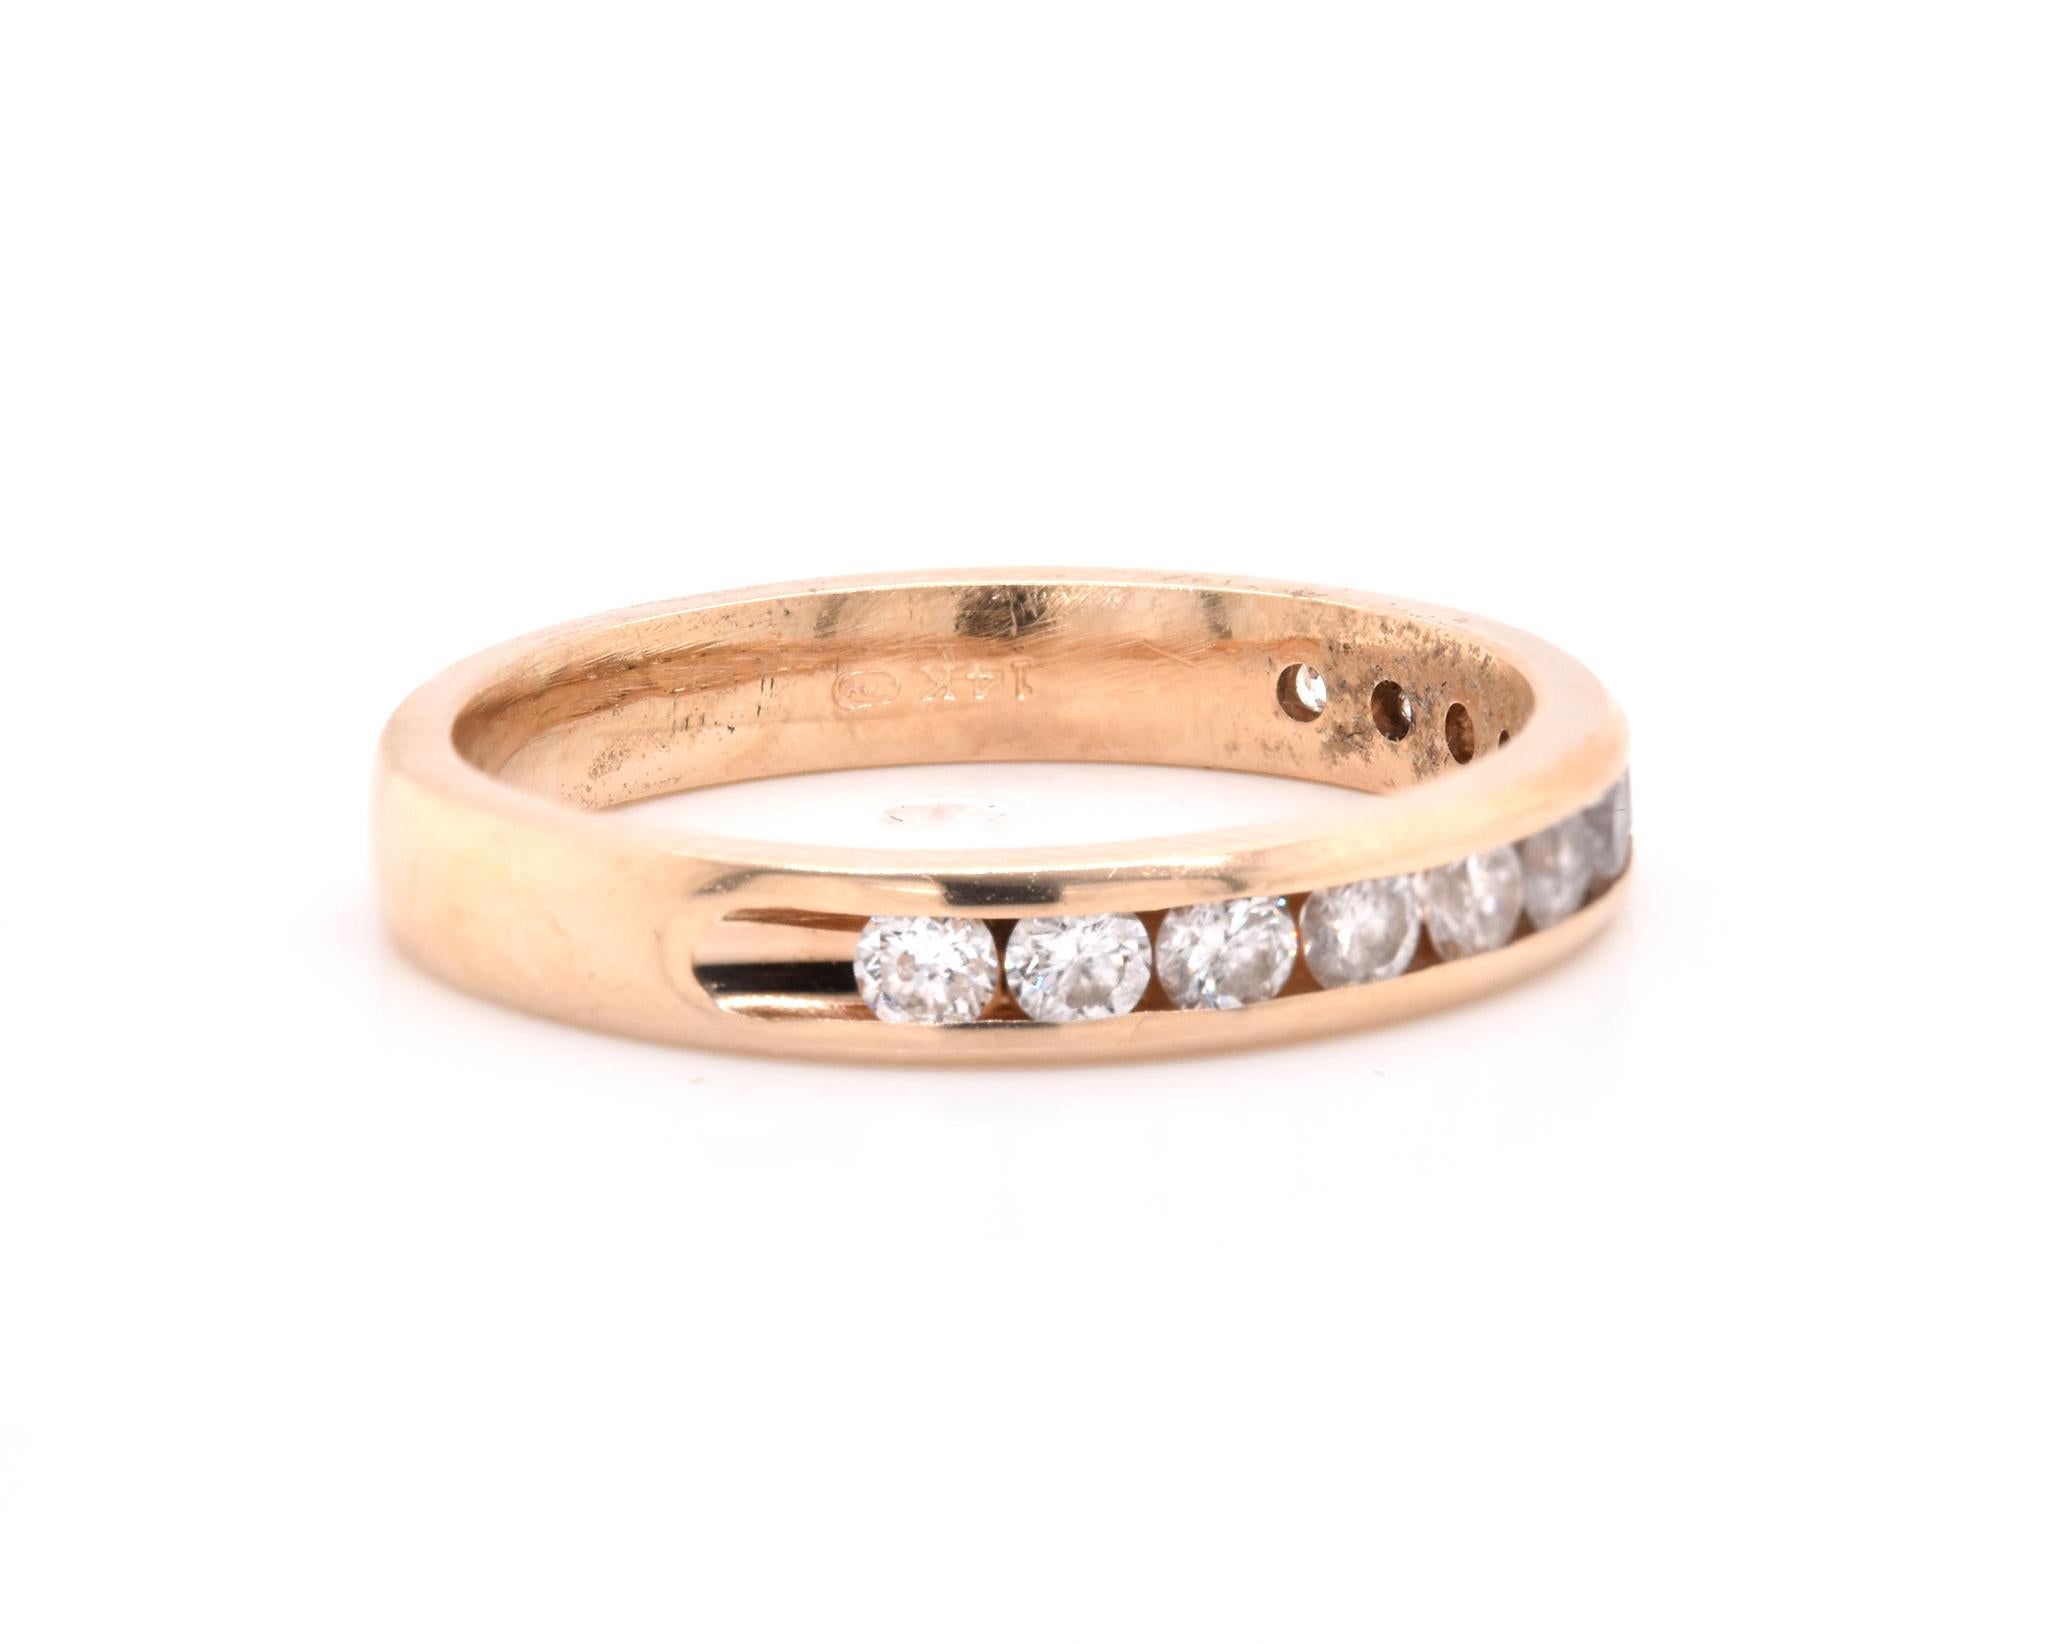 Designer: custom
Material: 14K yellow gold
Diamonds: 12 round cut = .60cttw
Color: H
Clarity: SI1
Size: 5.5 (please allow two additional shipping days for sizing requests)  
Dimensions: ring measures 3mm in width
Weight: 2.79 grams